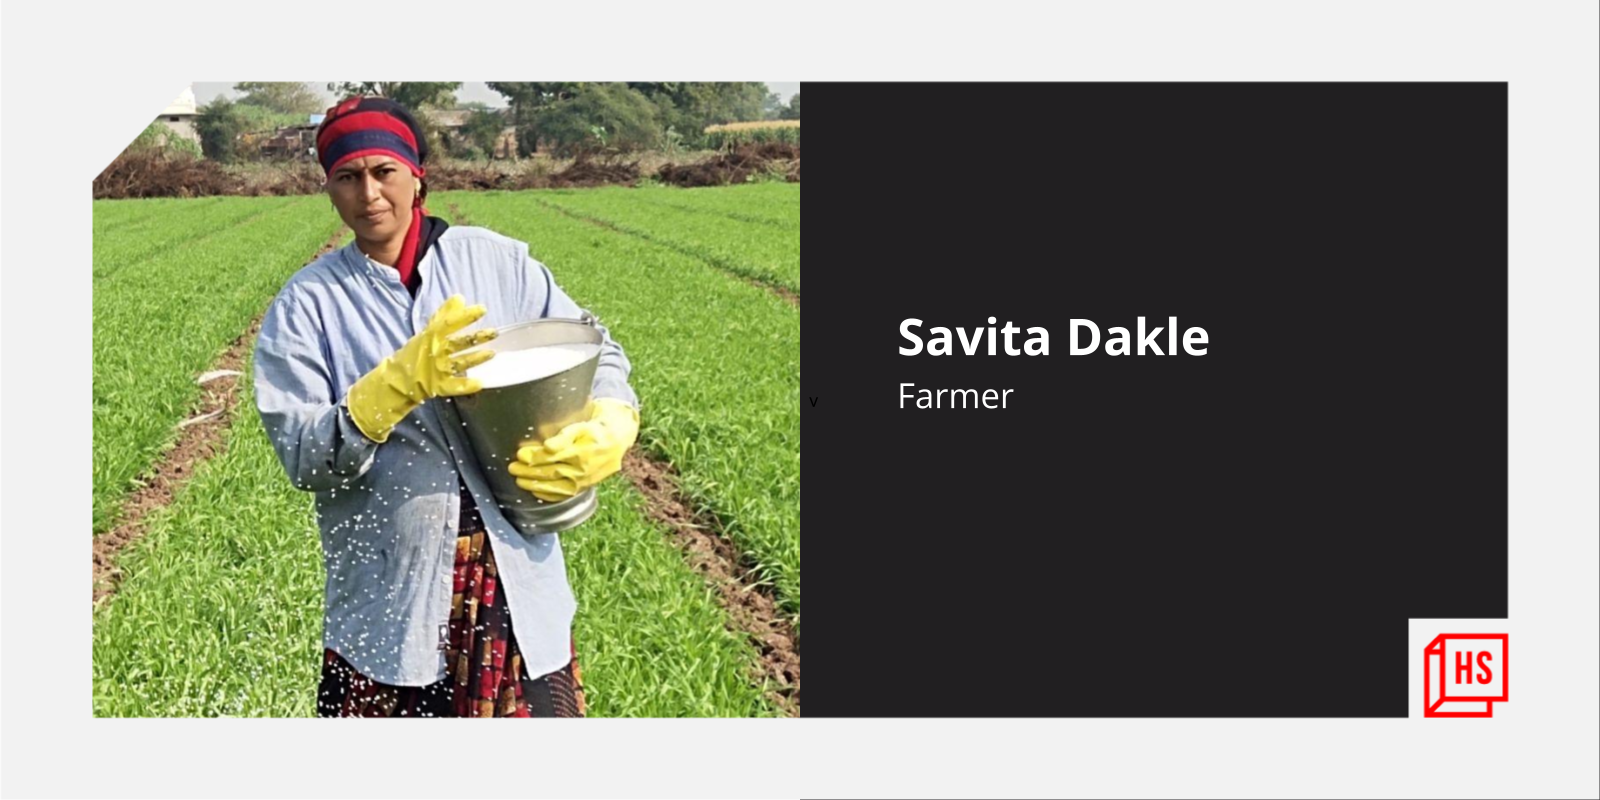 From dropping out in Class 10 to bringing one million Indian women farmers together on Facebook, the story of Savita Dakle 